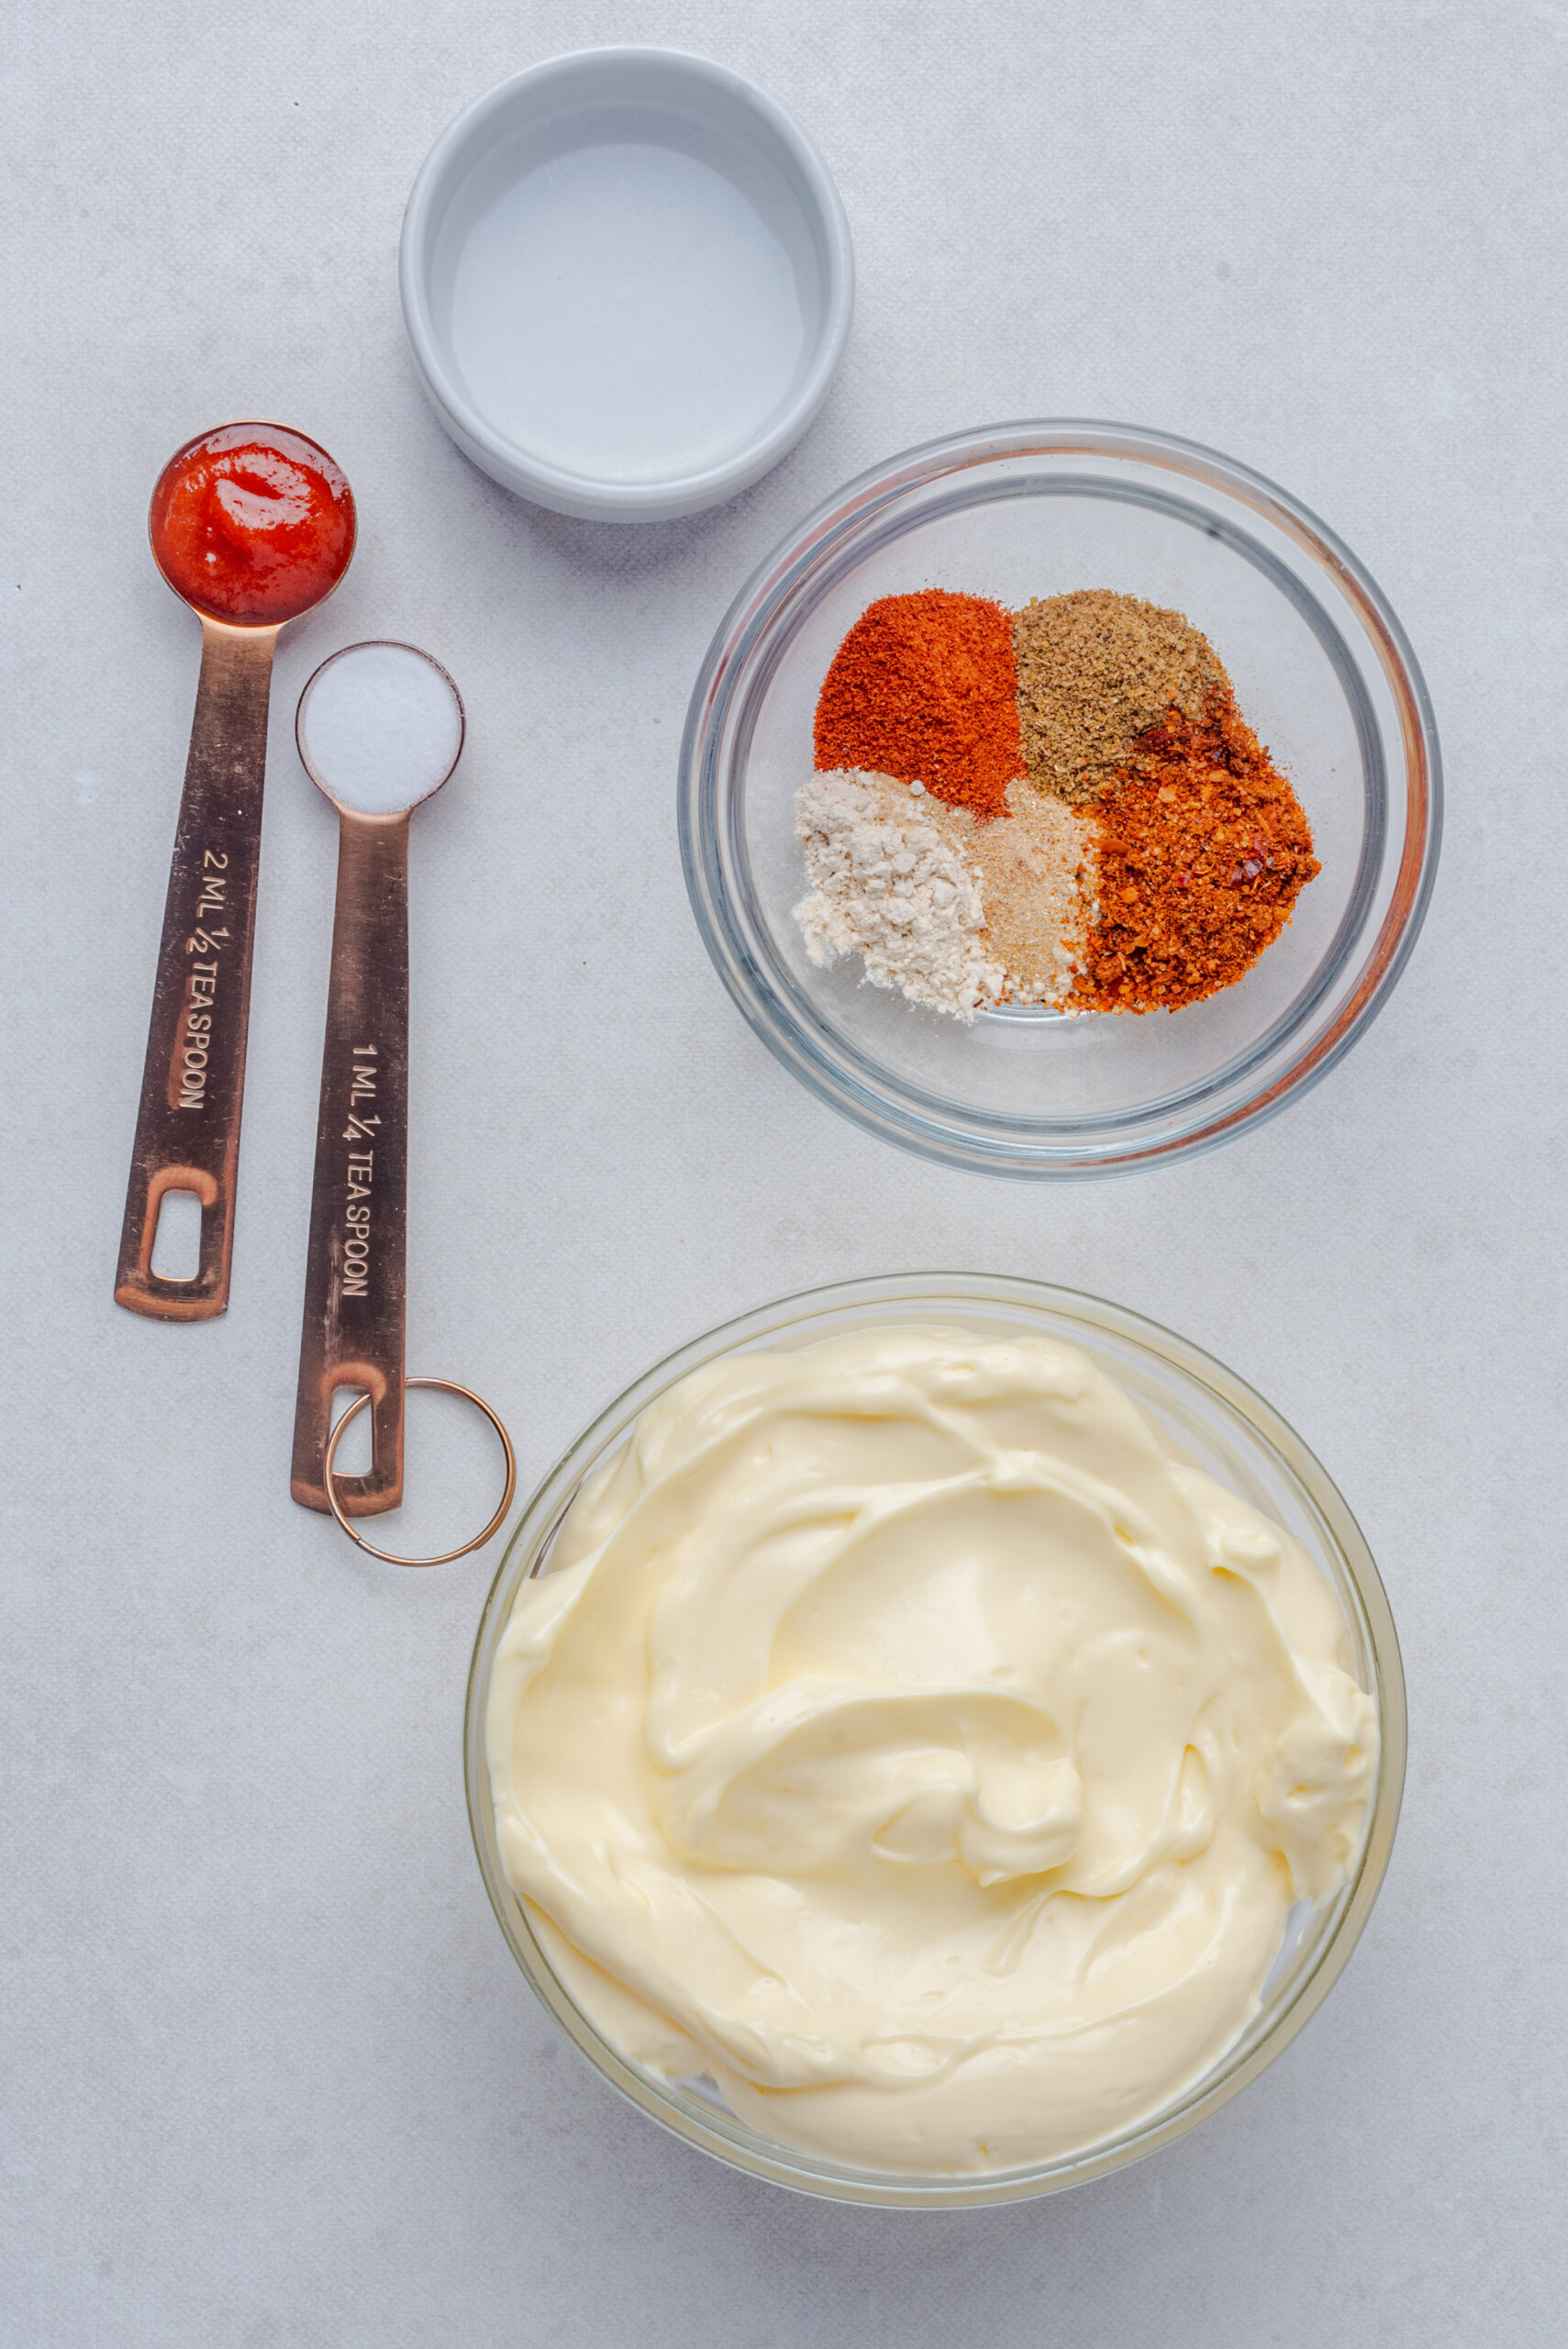 ingredients of Popeyes spicy mayo recipe